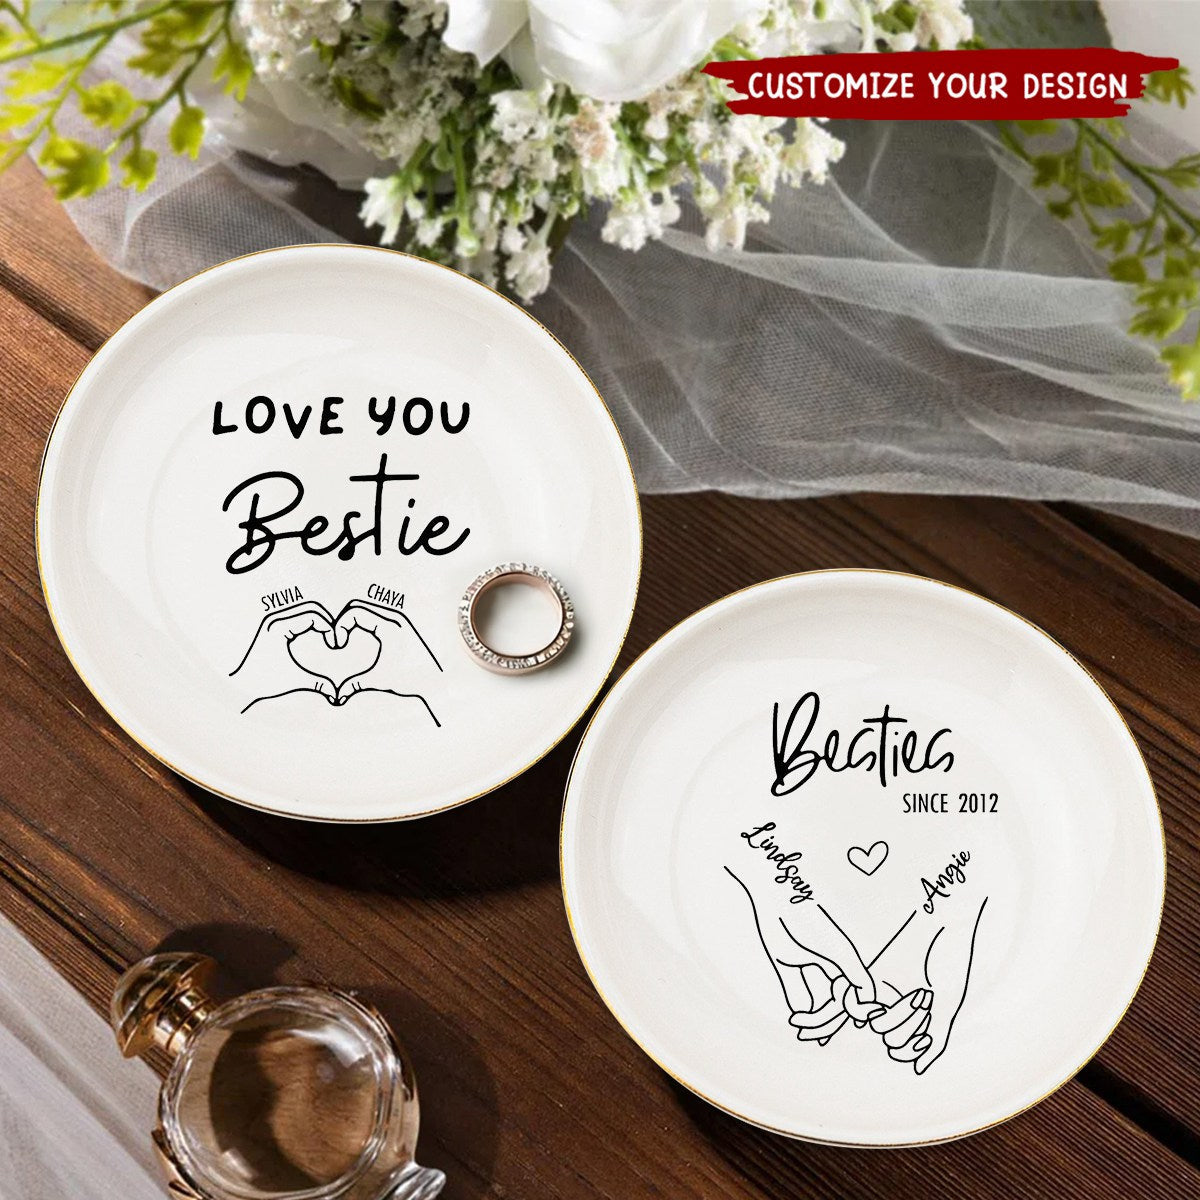 Personalized Love You Bestie Jewelry Dish Tray for Best Friend Sister Gift